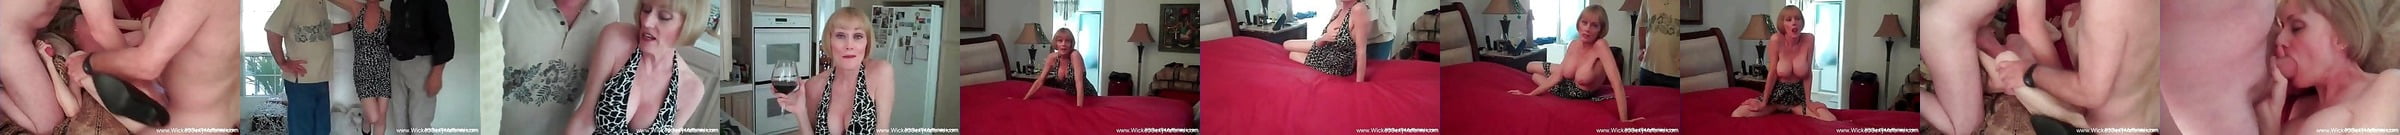 Granny And Her Neighbor Get It On Free Porn B9 Xhamster Xhamster